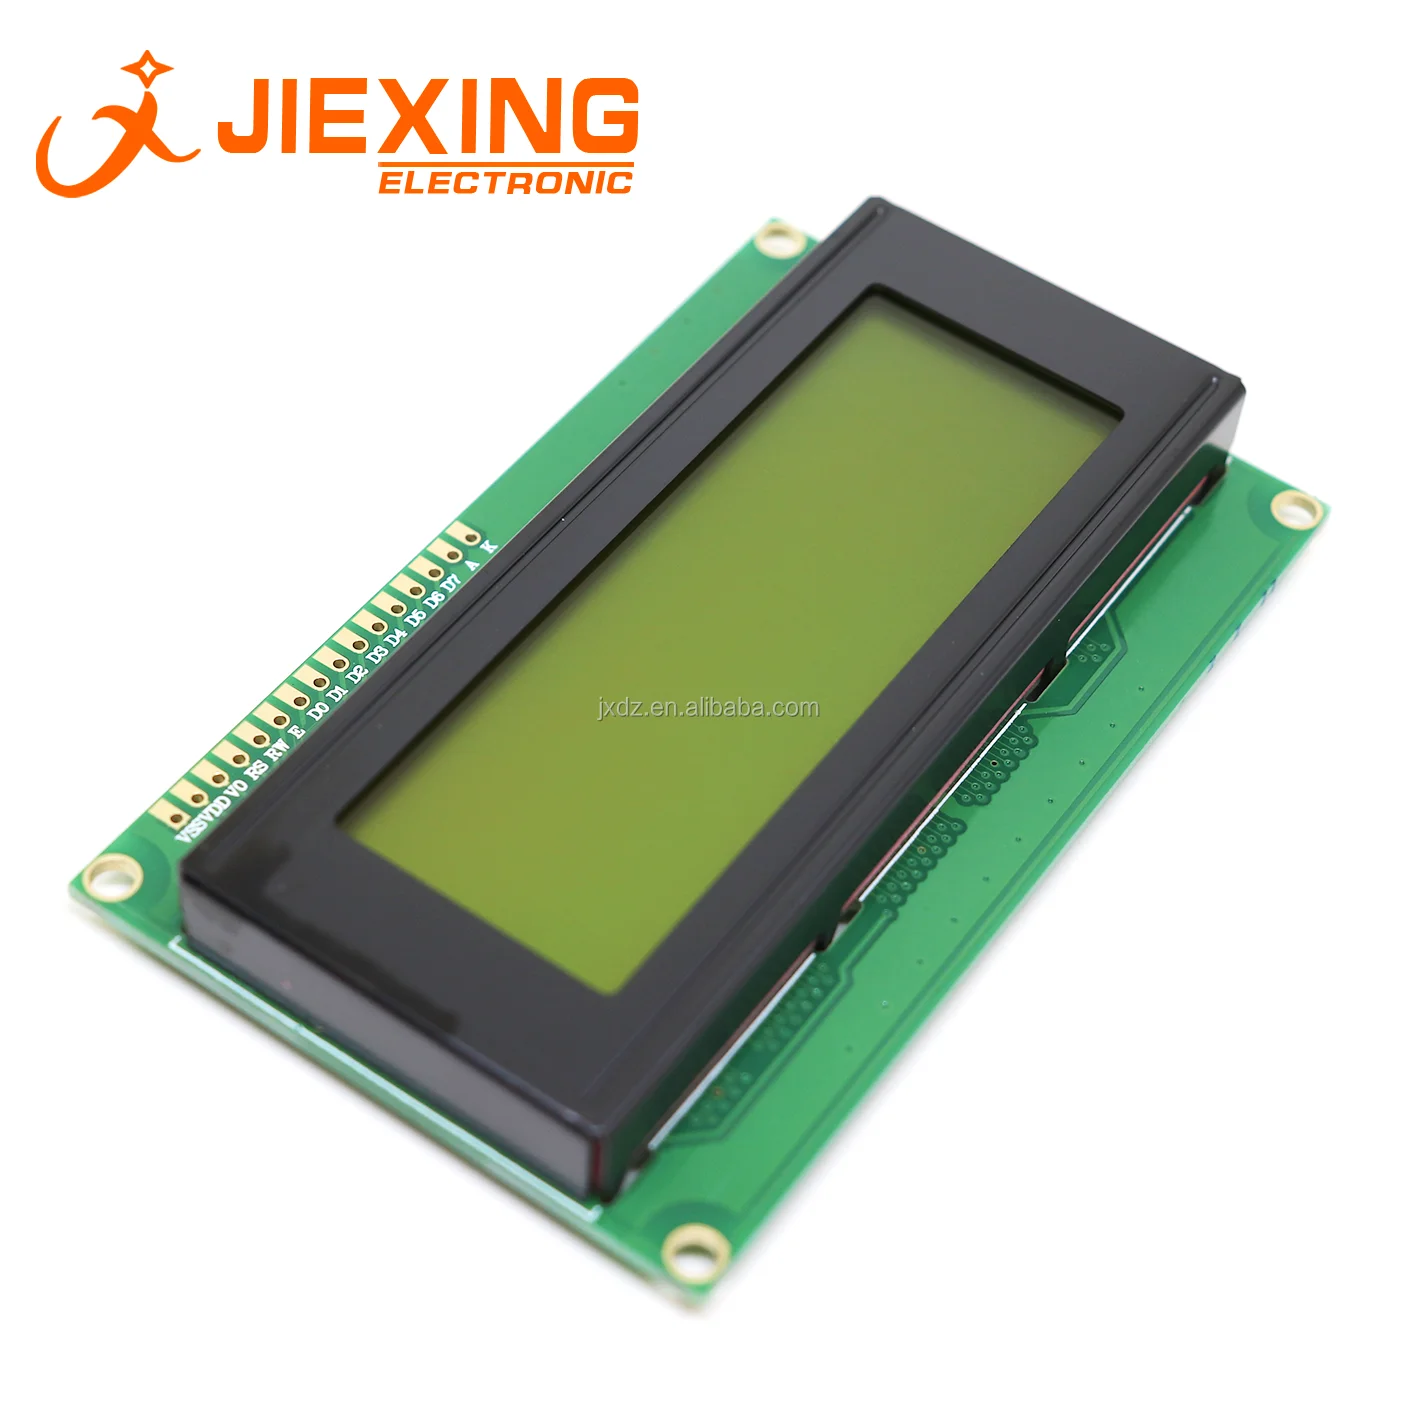 Details about   NEW&Original For KCS3224ASTT-X16 LCD Display Panel Replace #HQ57 YD 